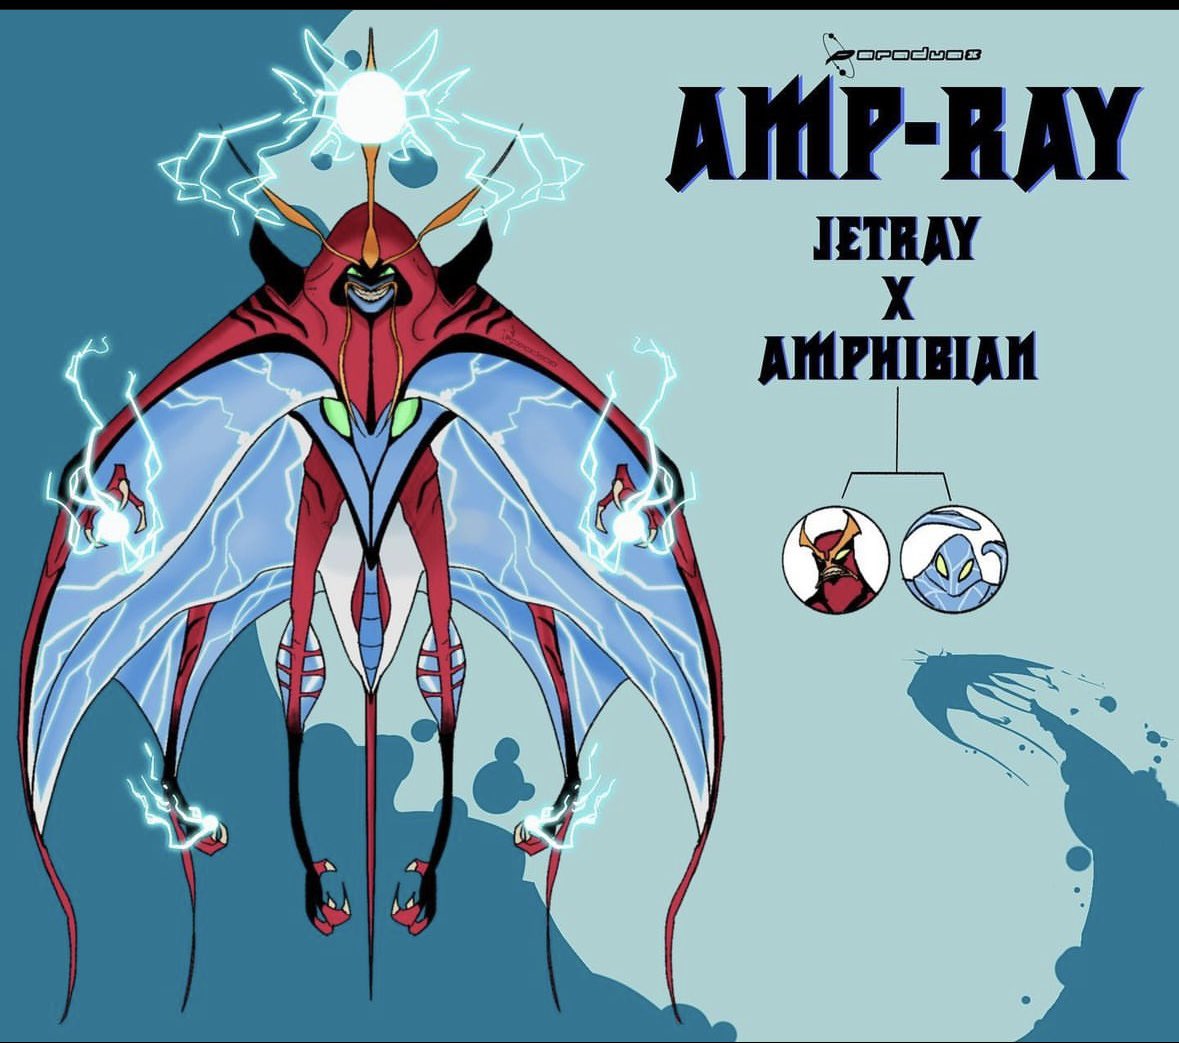 Do you remember this Jetray x Amphibian fusion?